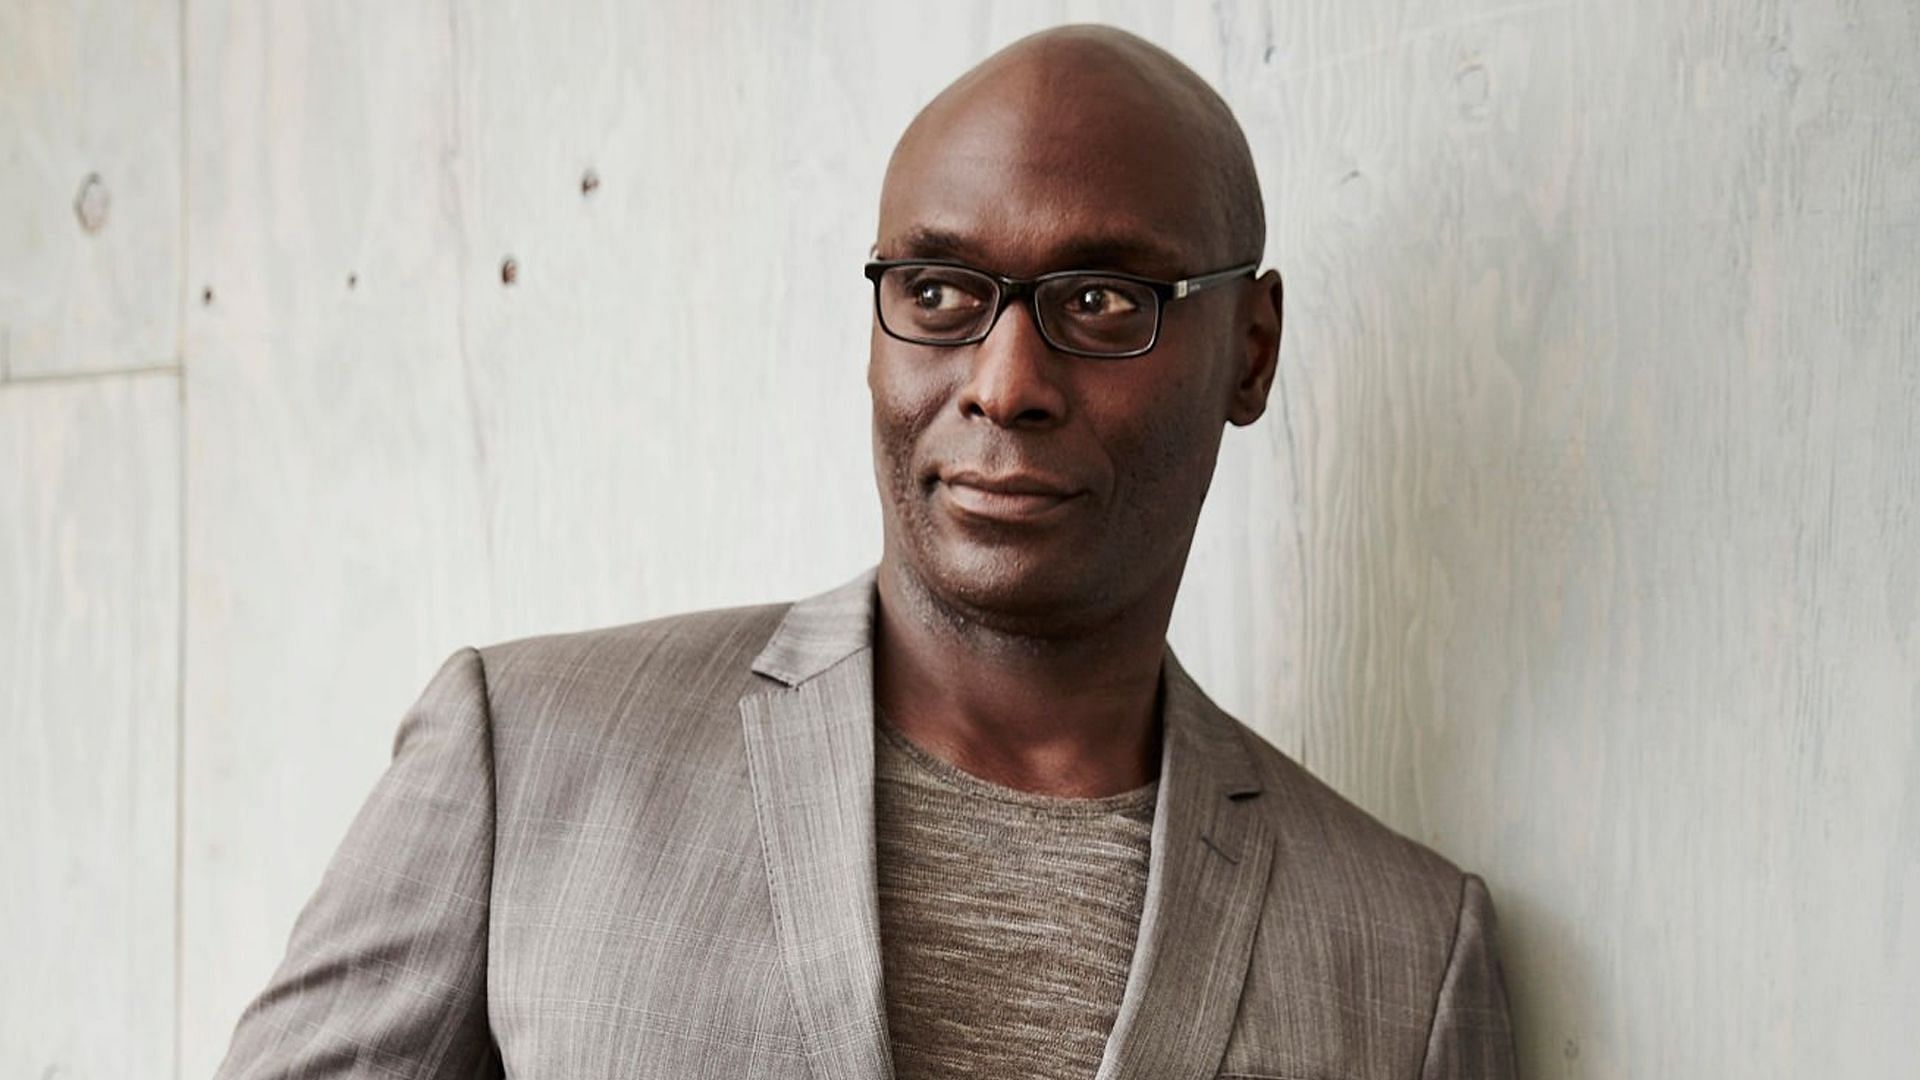 Actor Lance Reddick known for his role as Charon in John Wick has died (Image via Getty Images)